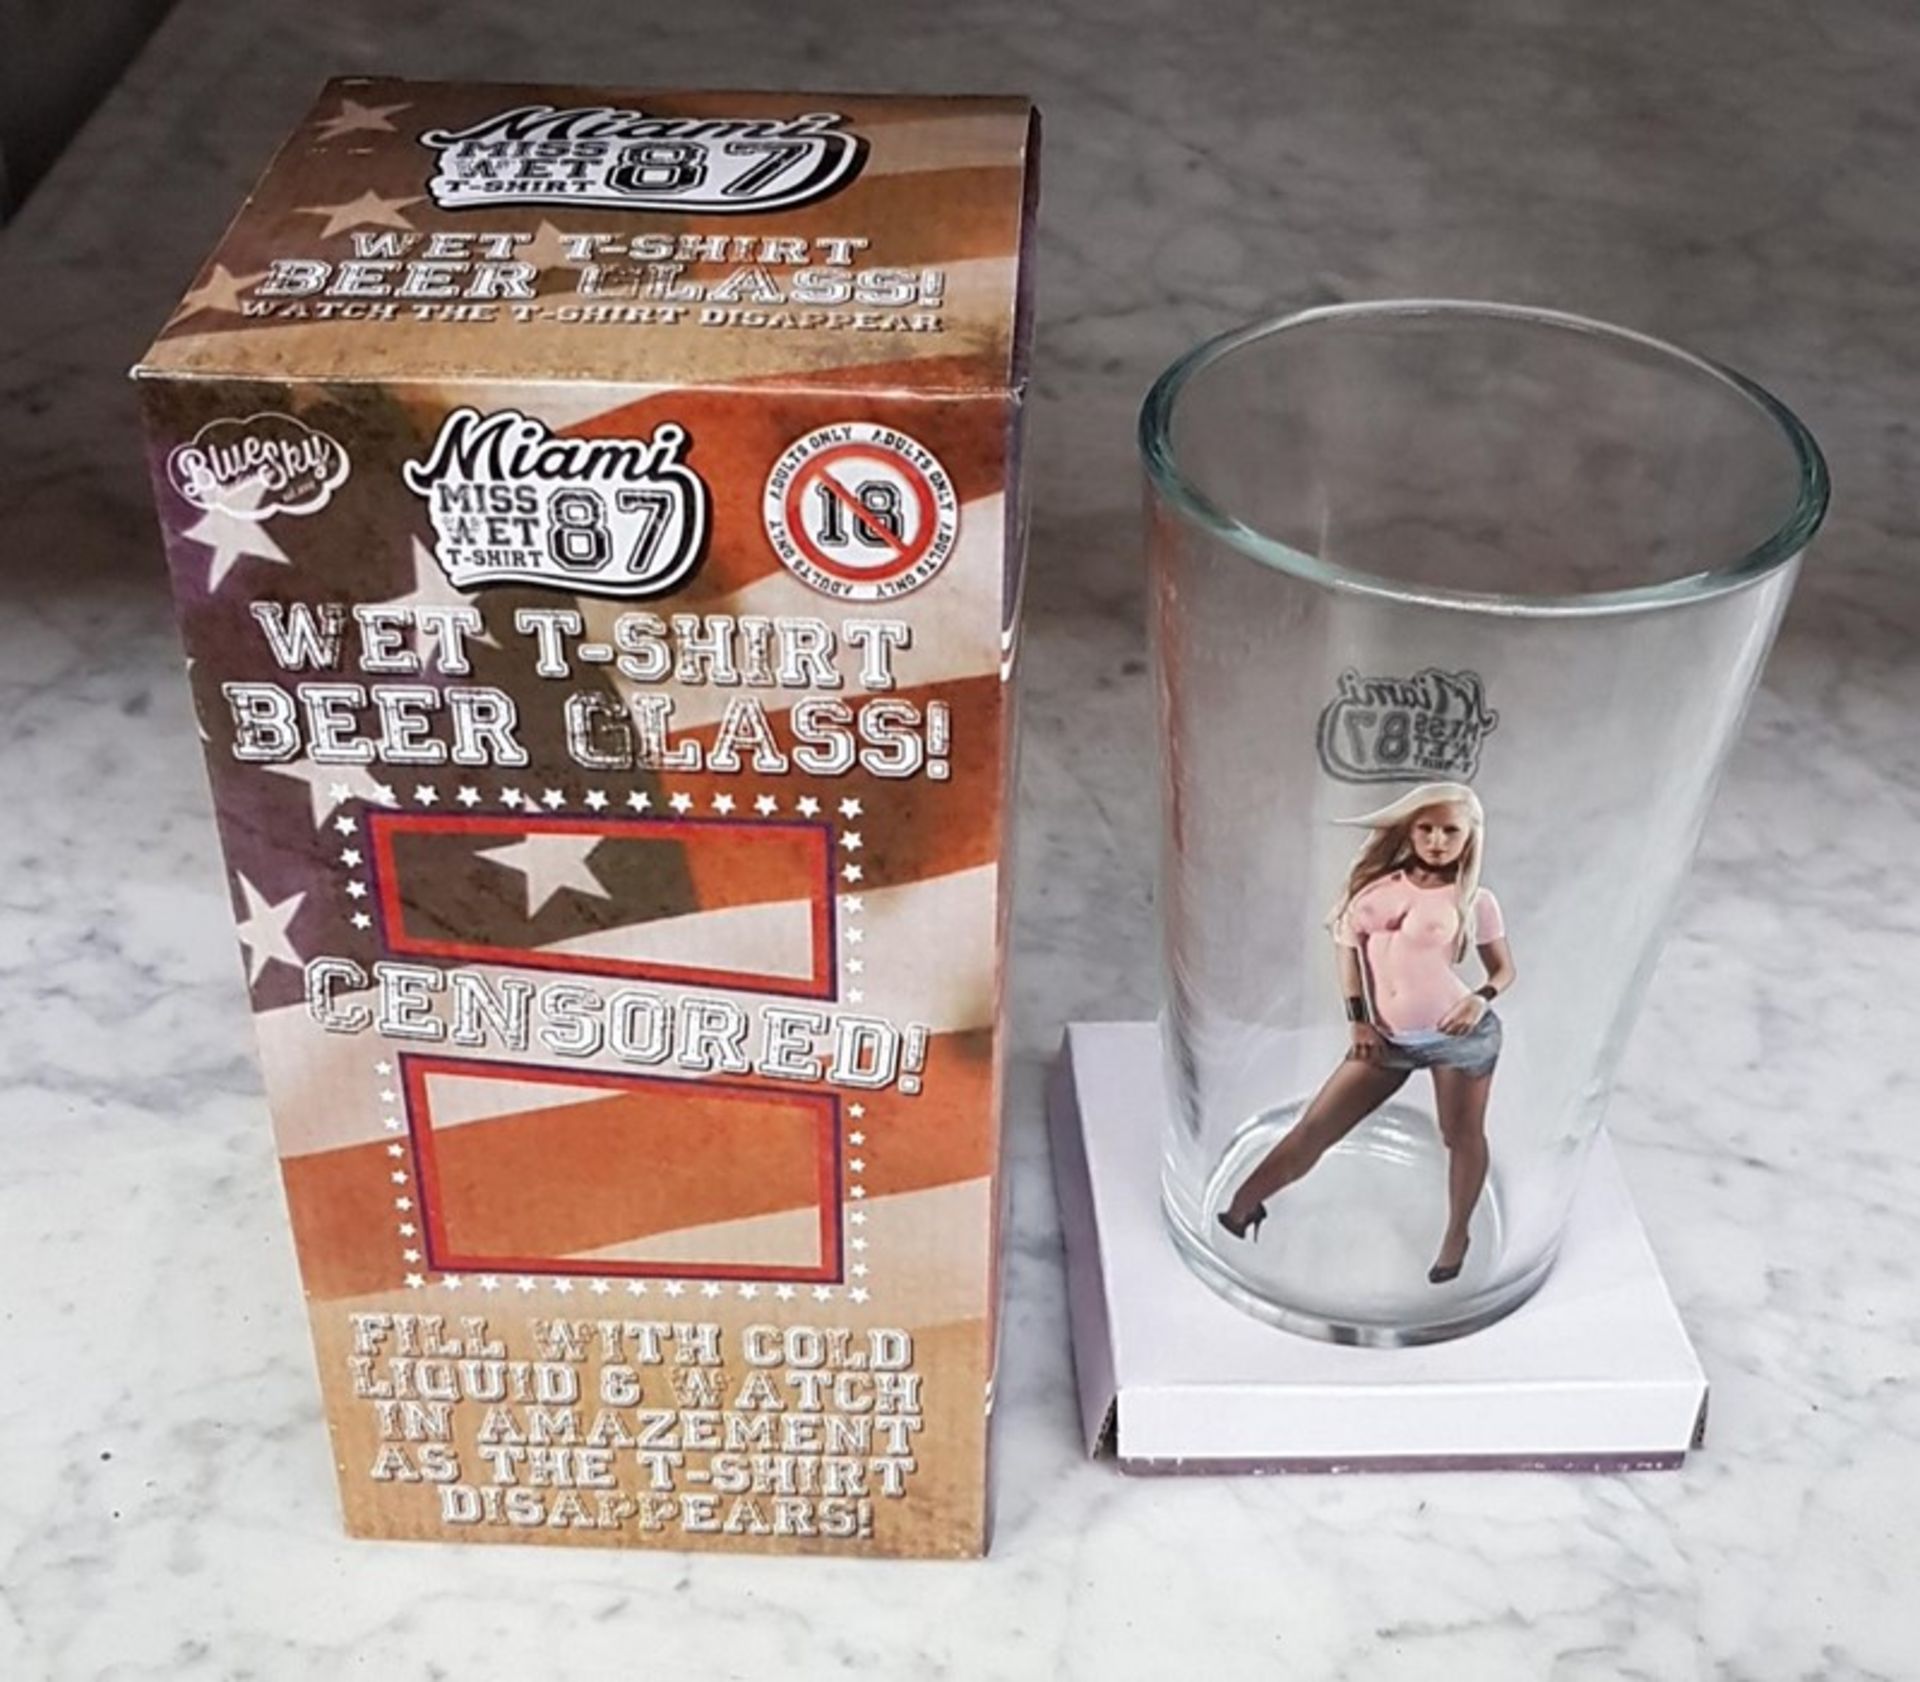 1 BOX OF 6 AS NEW MIAMI MISS WET T-SHIRT 87 BEER GLASS, FILL THE GLASS WITH LIQUID AND SEE THE T- - Image 2 of 2